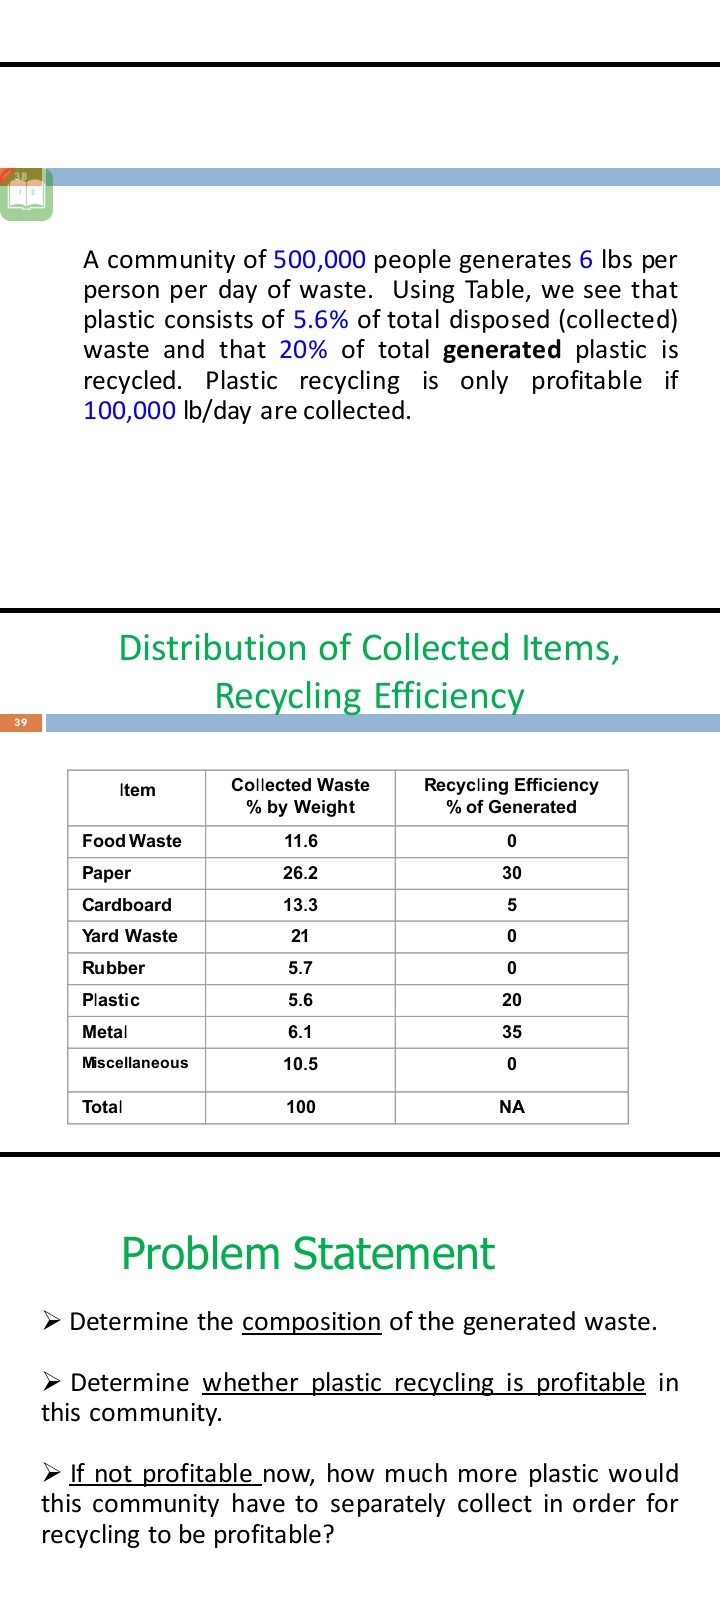 38
39
A community of 500,000 people generates 6 lbs per
person per day of waste. Using Table, we see that
plastic consists of 5.6% of total disposed (collected)
waste and that 20% of total generated plastic is
recycled. Plastic recycling is only profitable if
100,000 lb/day are collected.
Distribution of Collected Items,
Recycling Efficiency
Item
Collected Waste
% by Weight
Recycling Efficiency
% of Generated
Food Waste
11.6
0
Paper
26.2
30
Cardboard
13.3
5
Yard Waste
21
0
Rubber
5.7
0
Plastic
5.6
20
Metal
6.1
35
Miscellaneous
10.5
0
Total
100
ΝΑ
Problem Statement
Determine the composition of the generated waste.
Determine whether plastic recycling is profitable in
this community.
>If not profitable now, how much more plastic would
this community have to separately collect in order for
recycling to be profitable?